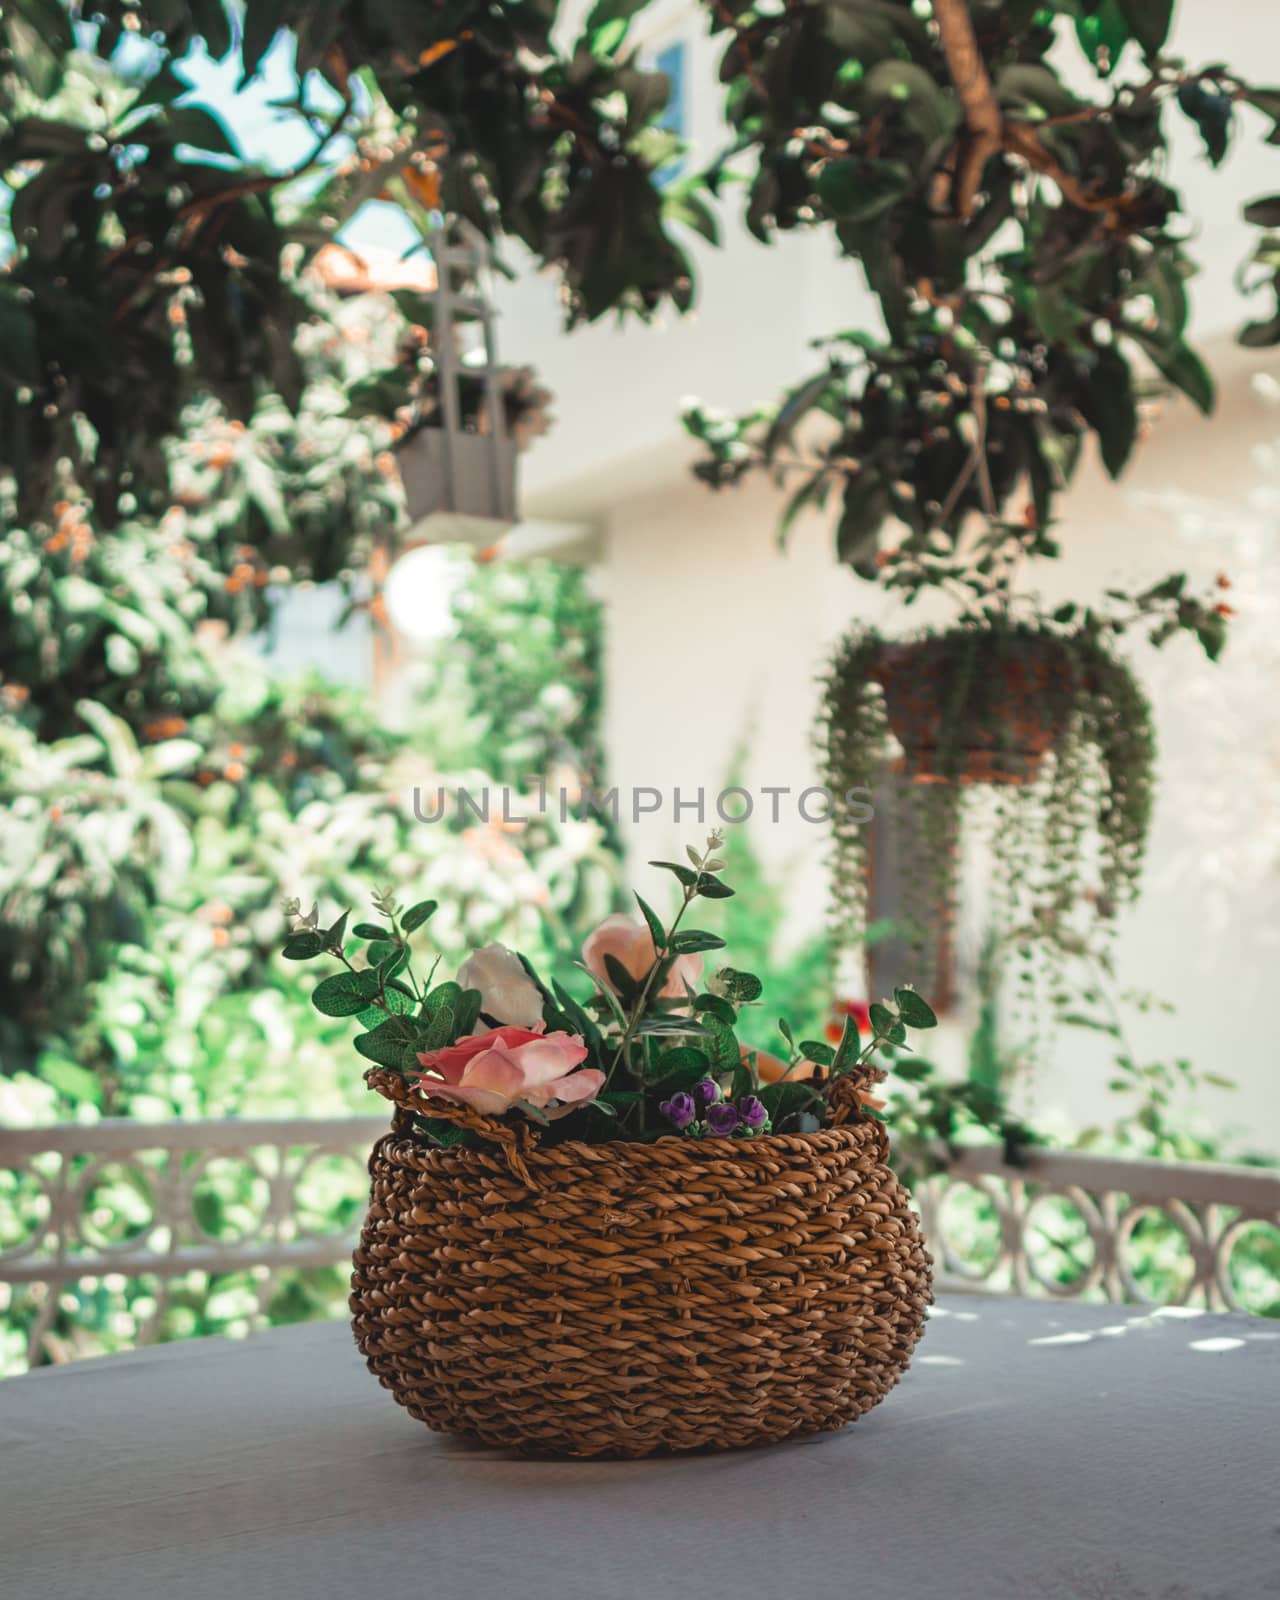 Basket with artificial flowers on vernada.